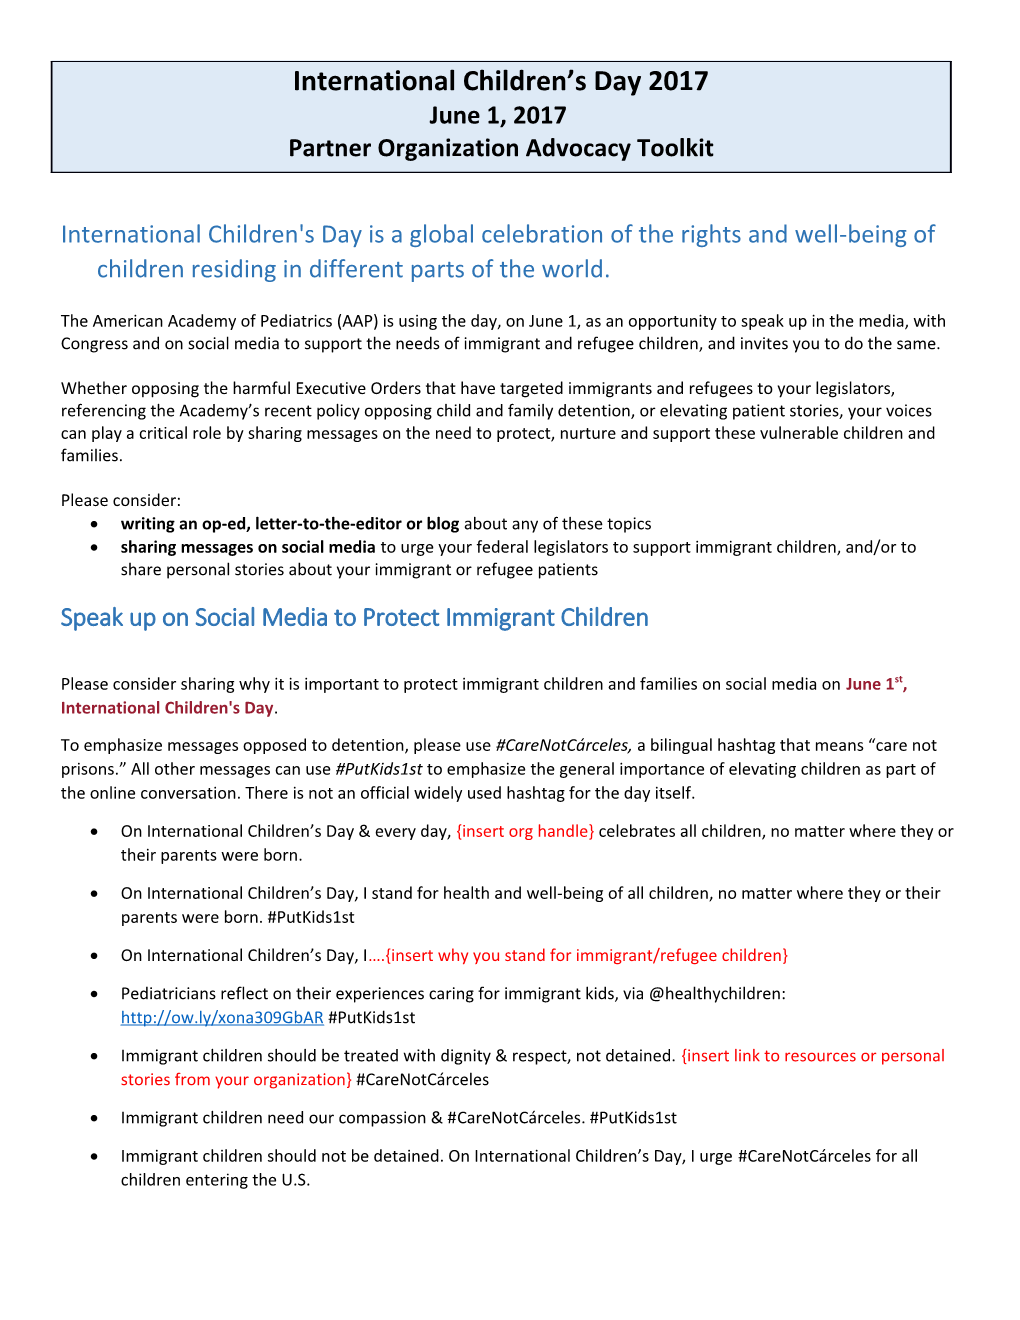 International Children's Day Is a Global Celebration of the Rights and Well-Being of Children